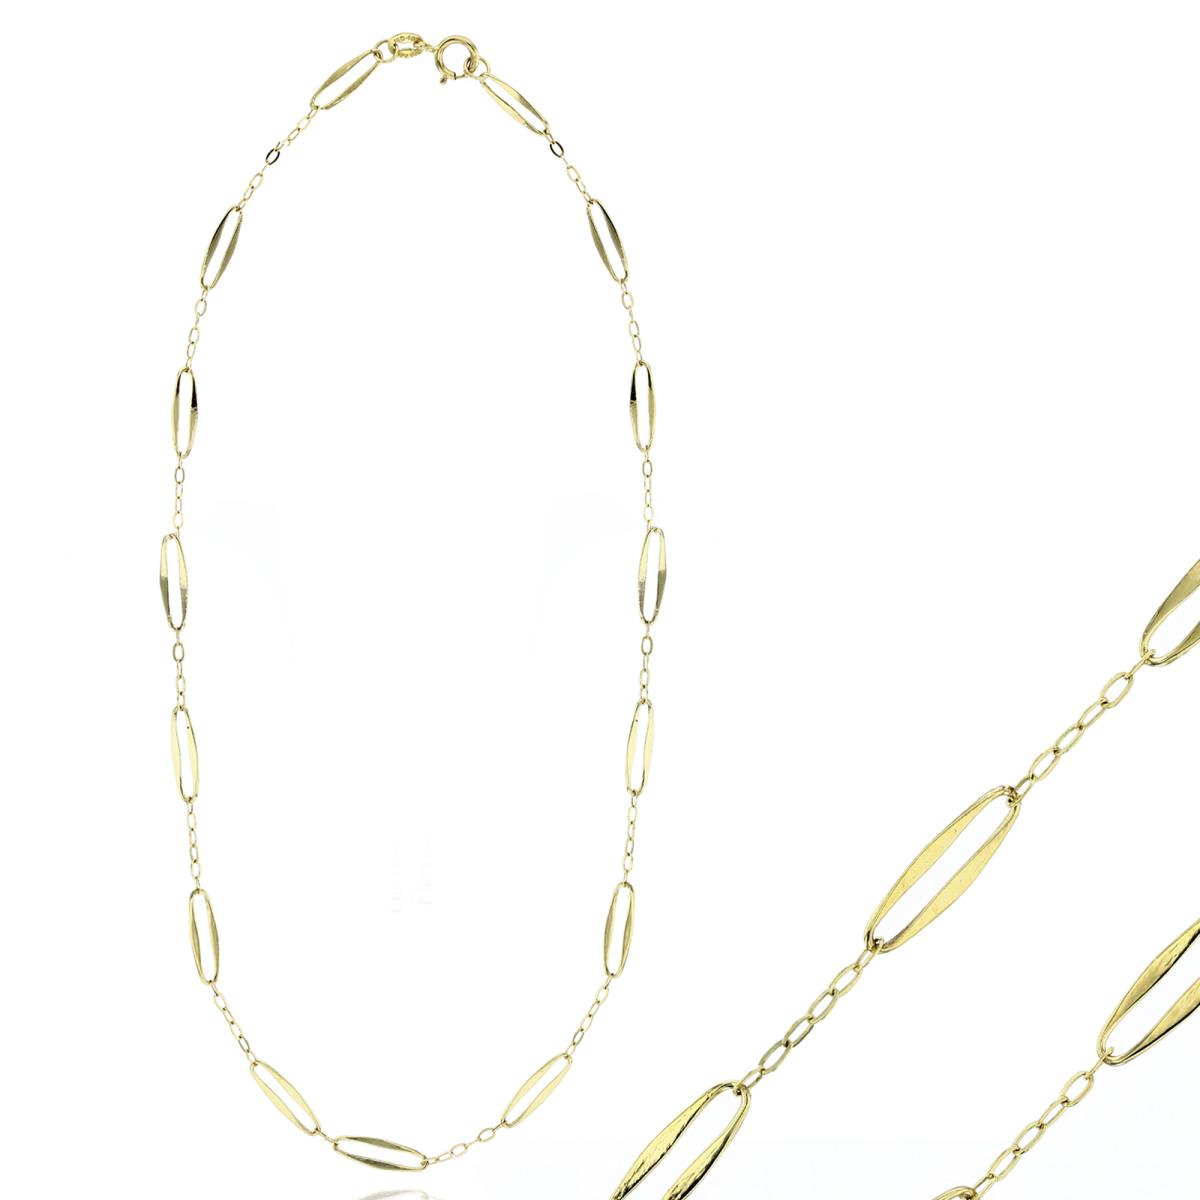 10K Yellow Gold Polished Oval Links 17" Necklace